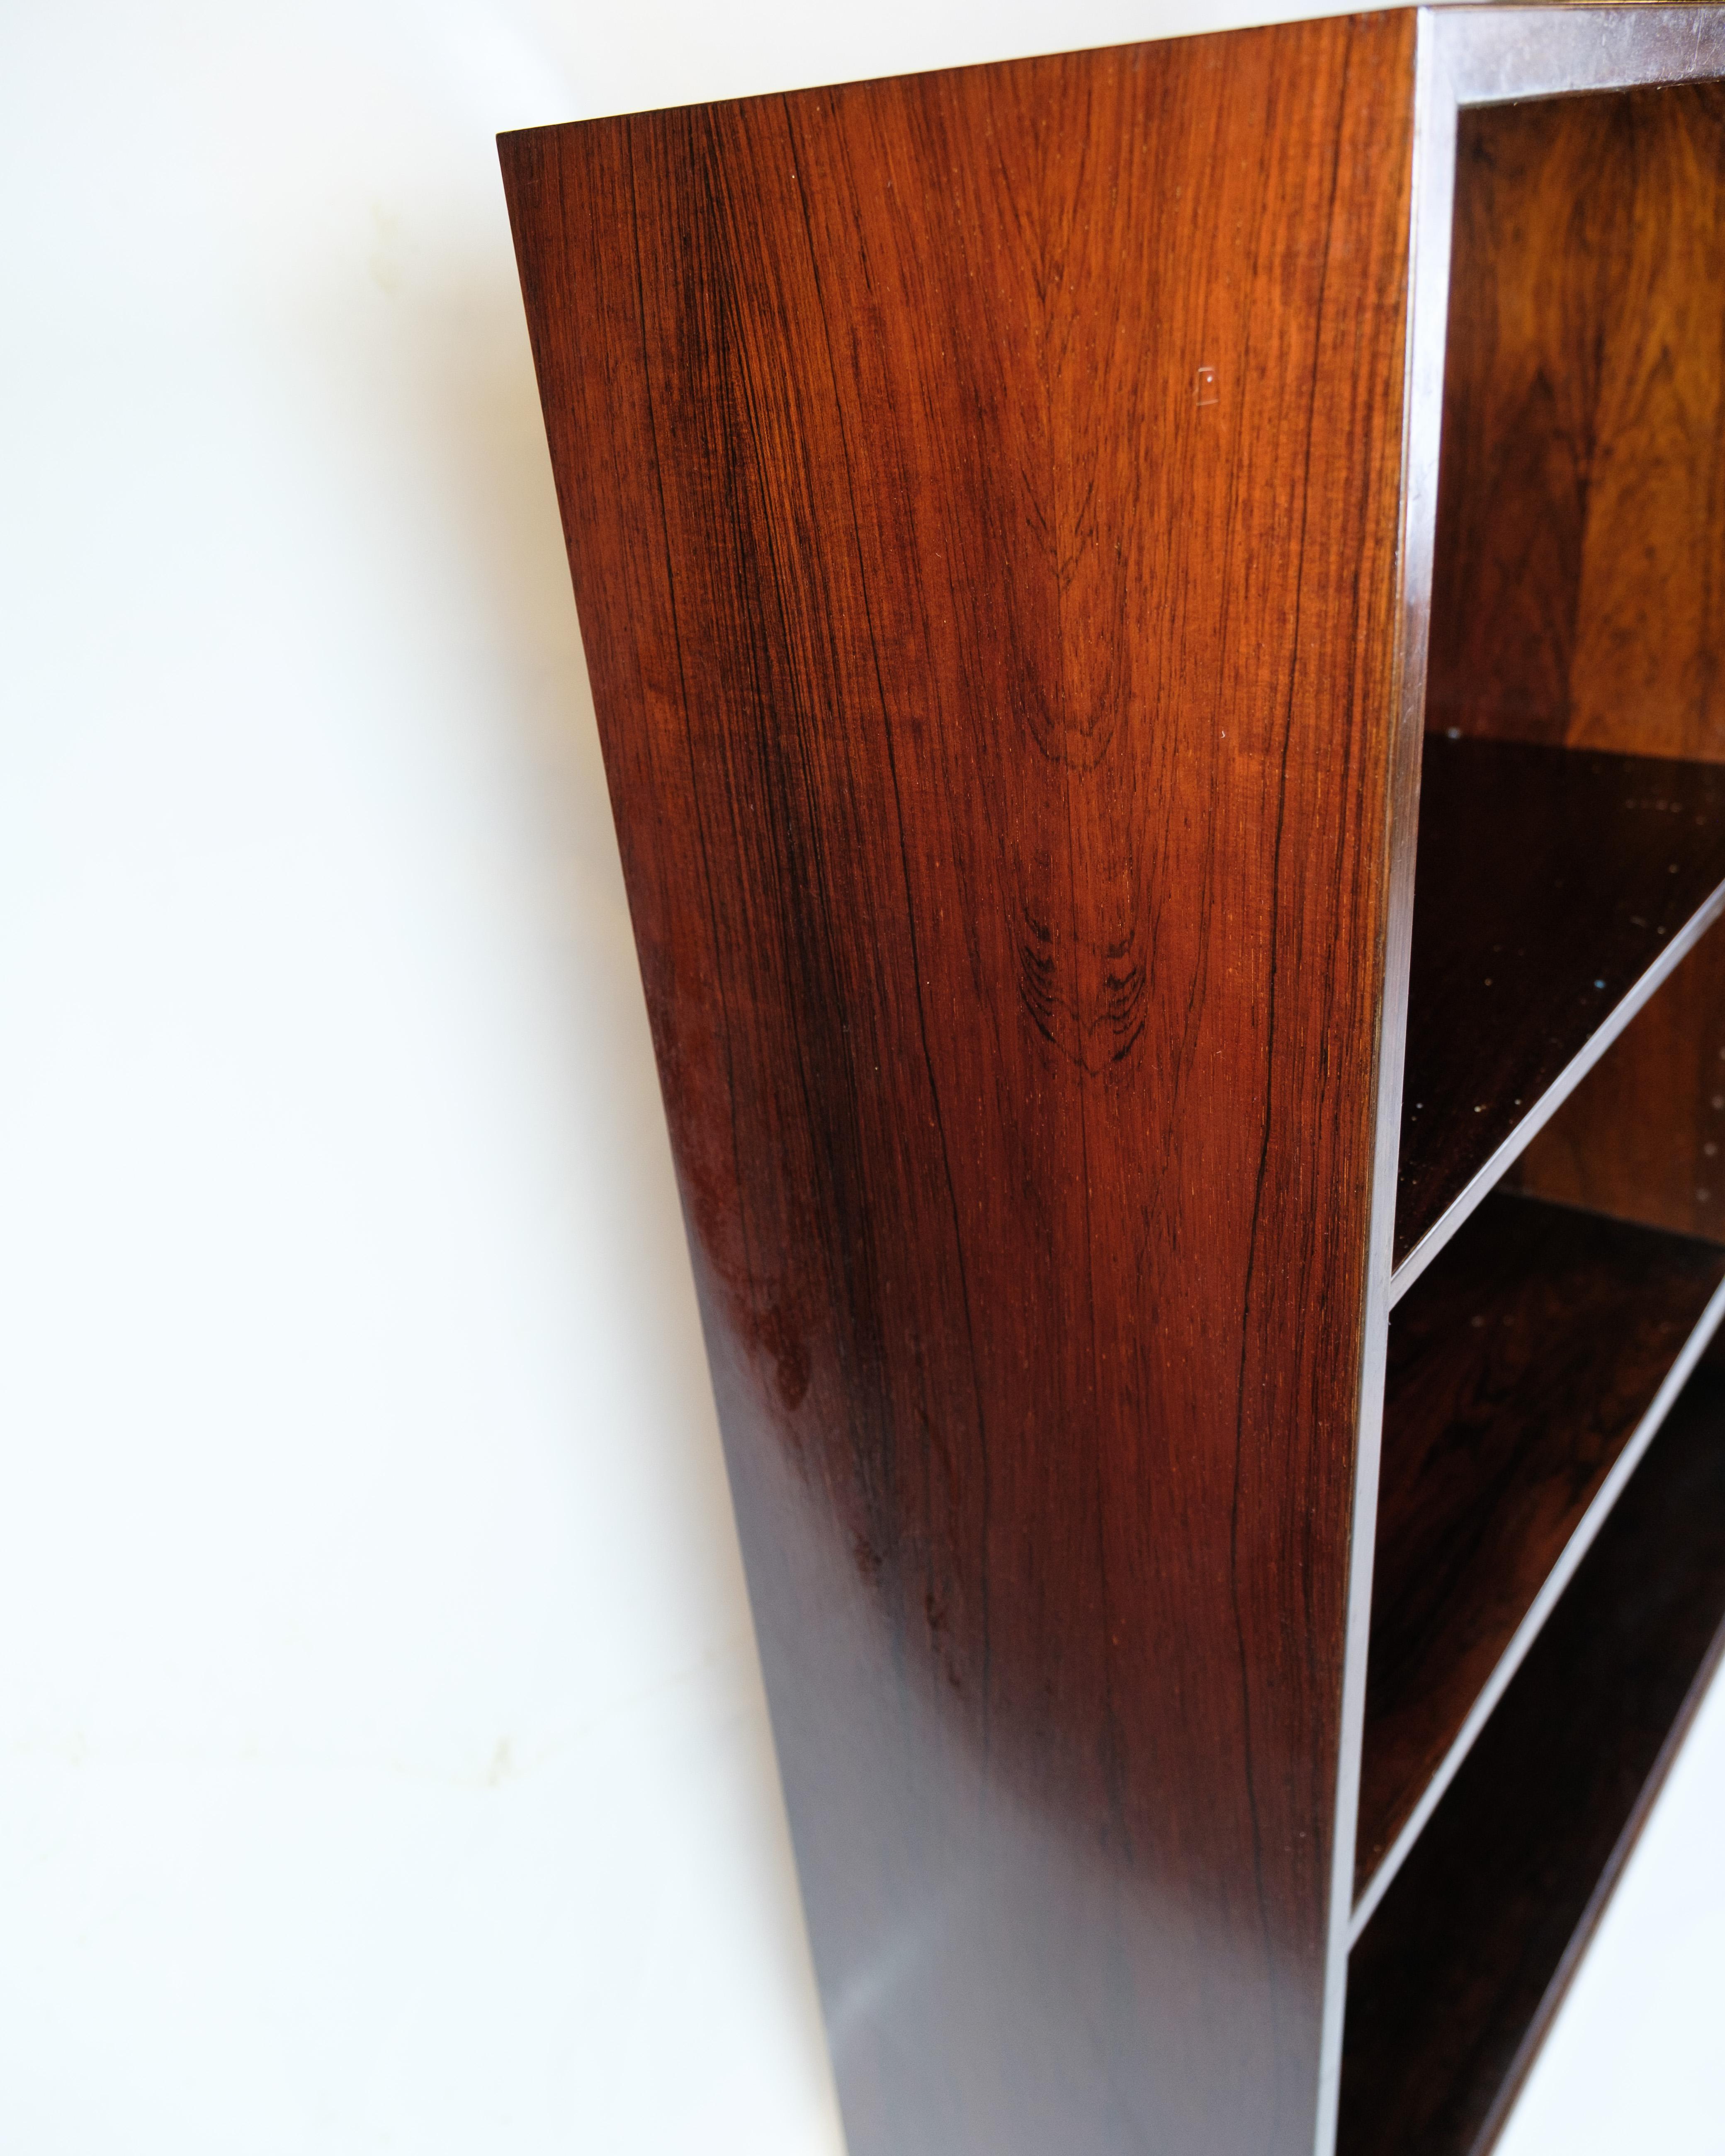 Mid-20th Century Bookcase Model 35 Made In Rosewood By Omann Jun. Furniture Factory From 1960s For Sale